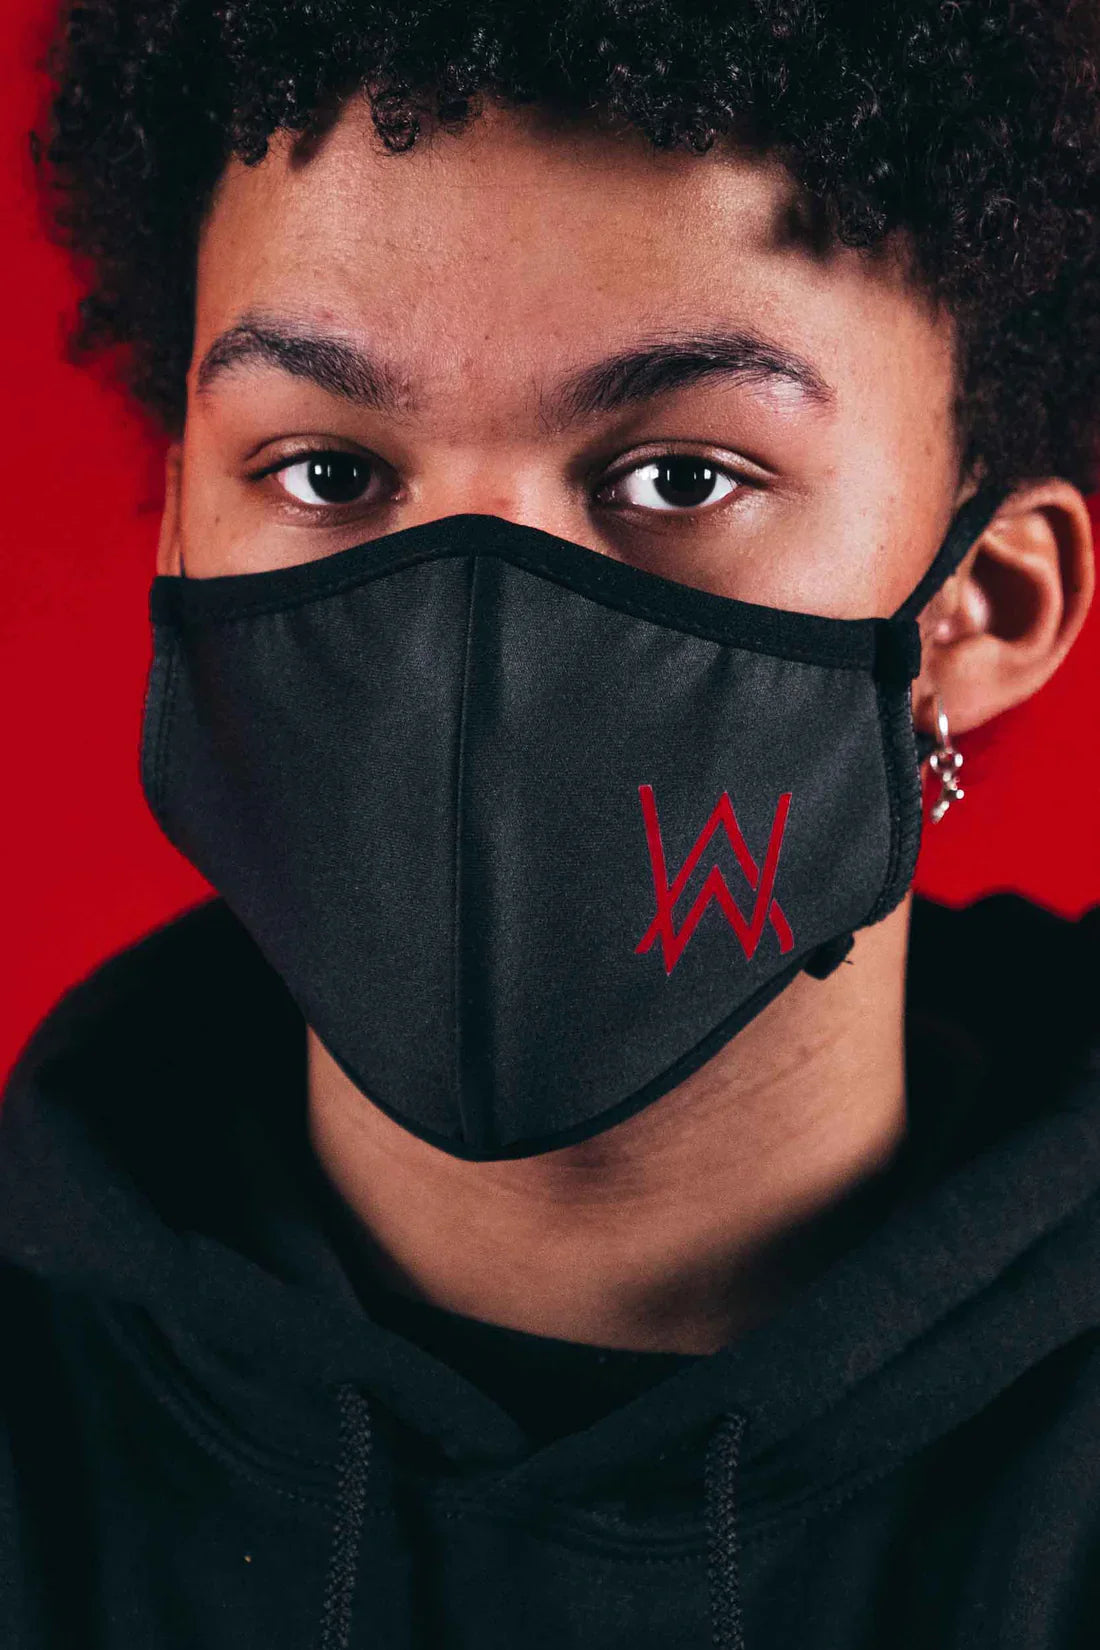 Young person wearing a black protective mask with a bold red Alan Walker logo, set against a red backdrop.